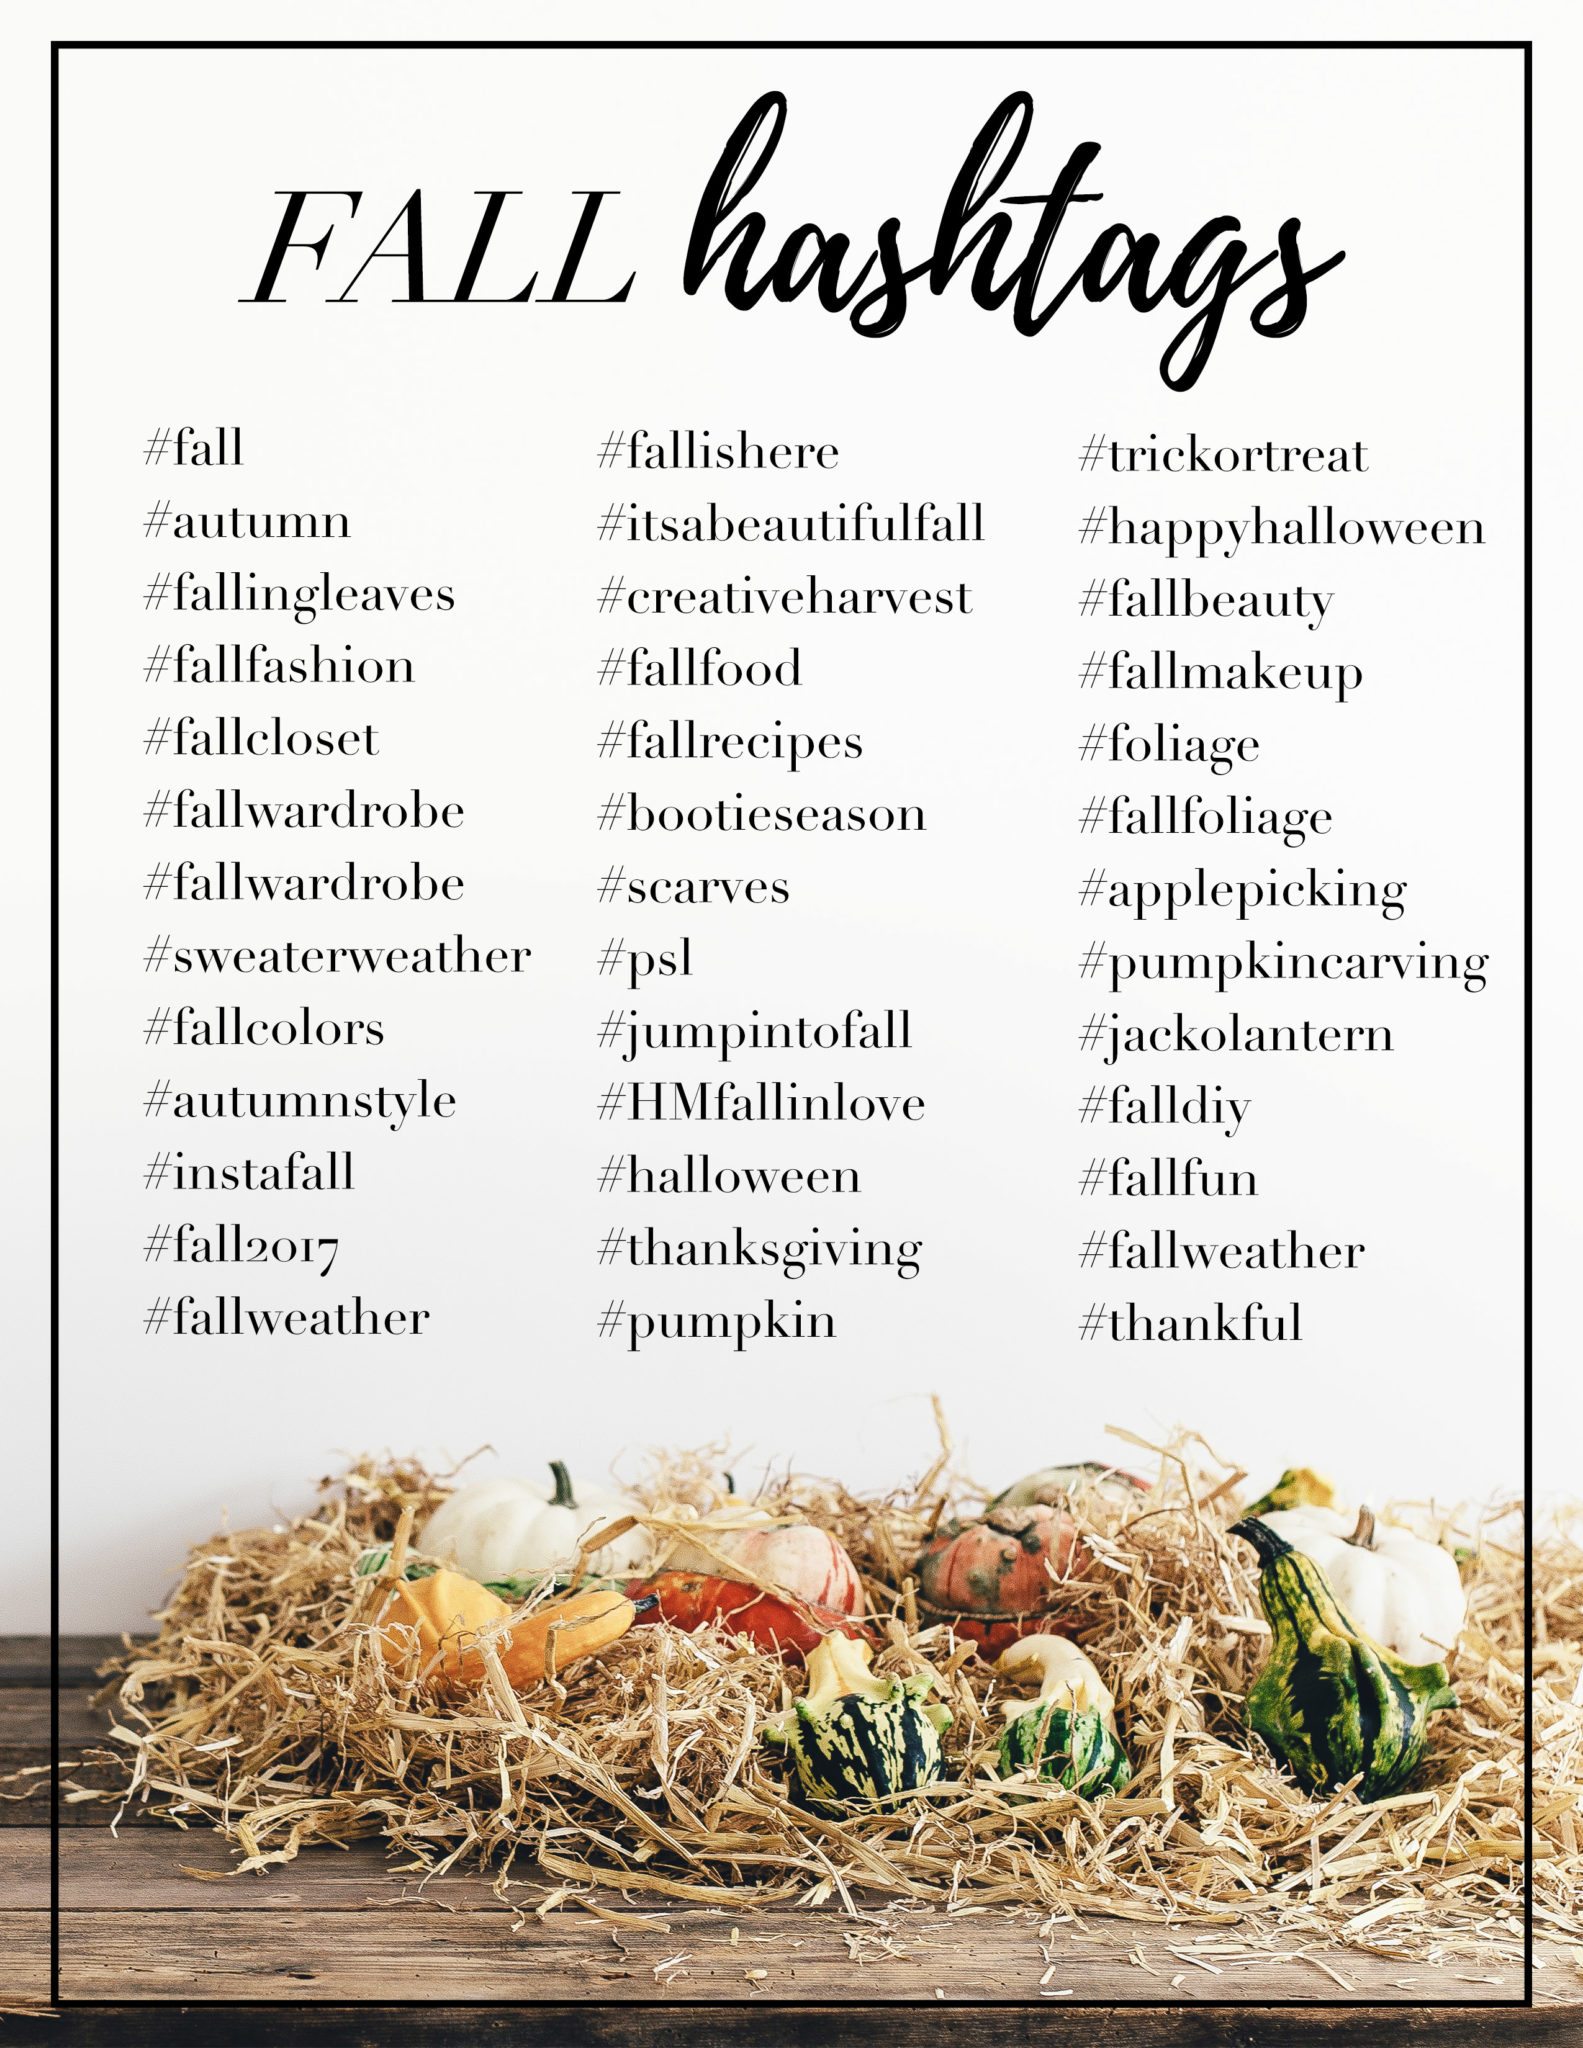 Fall-Hashtags - Holly Habeck